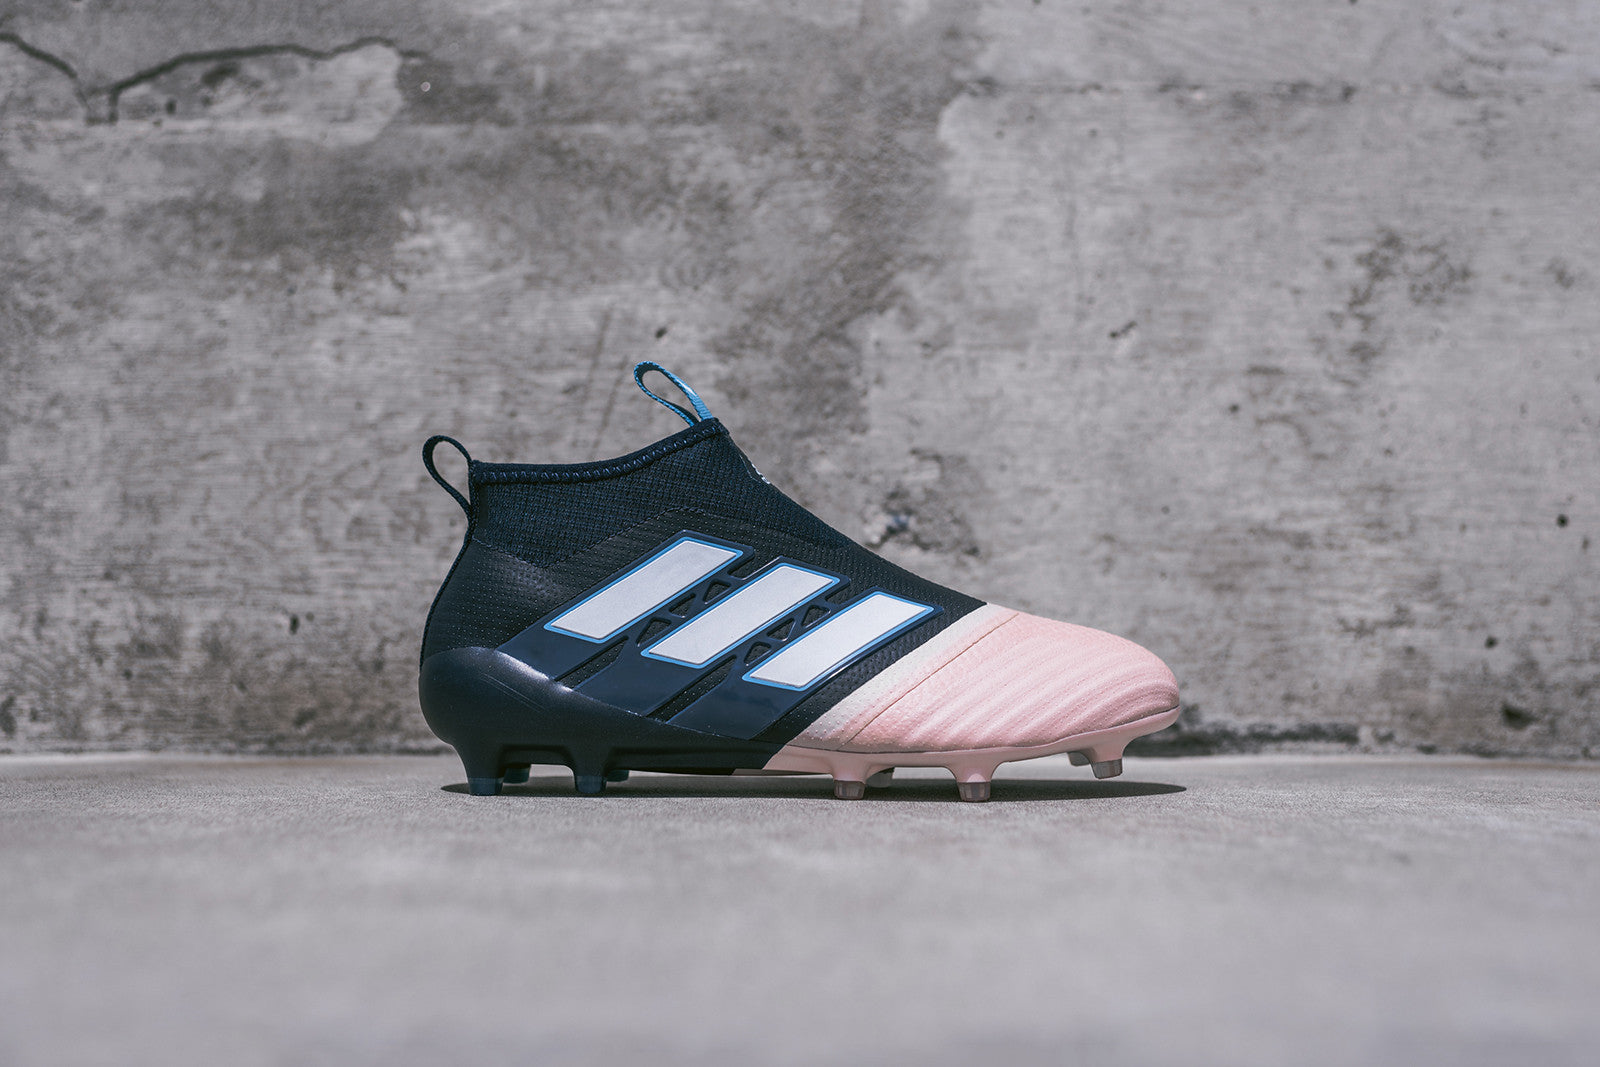 kith soccer cleats